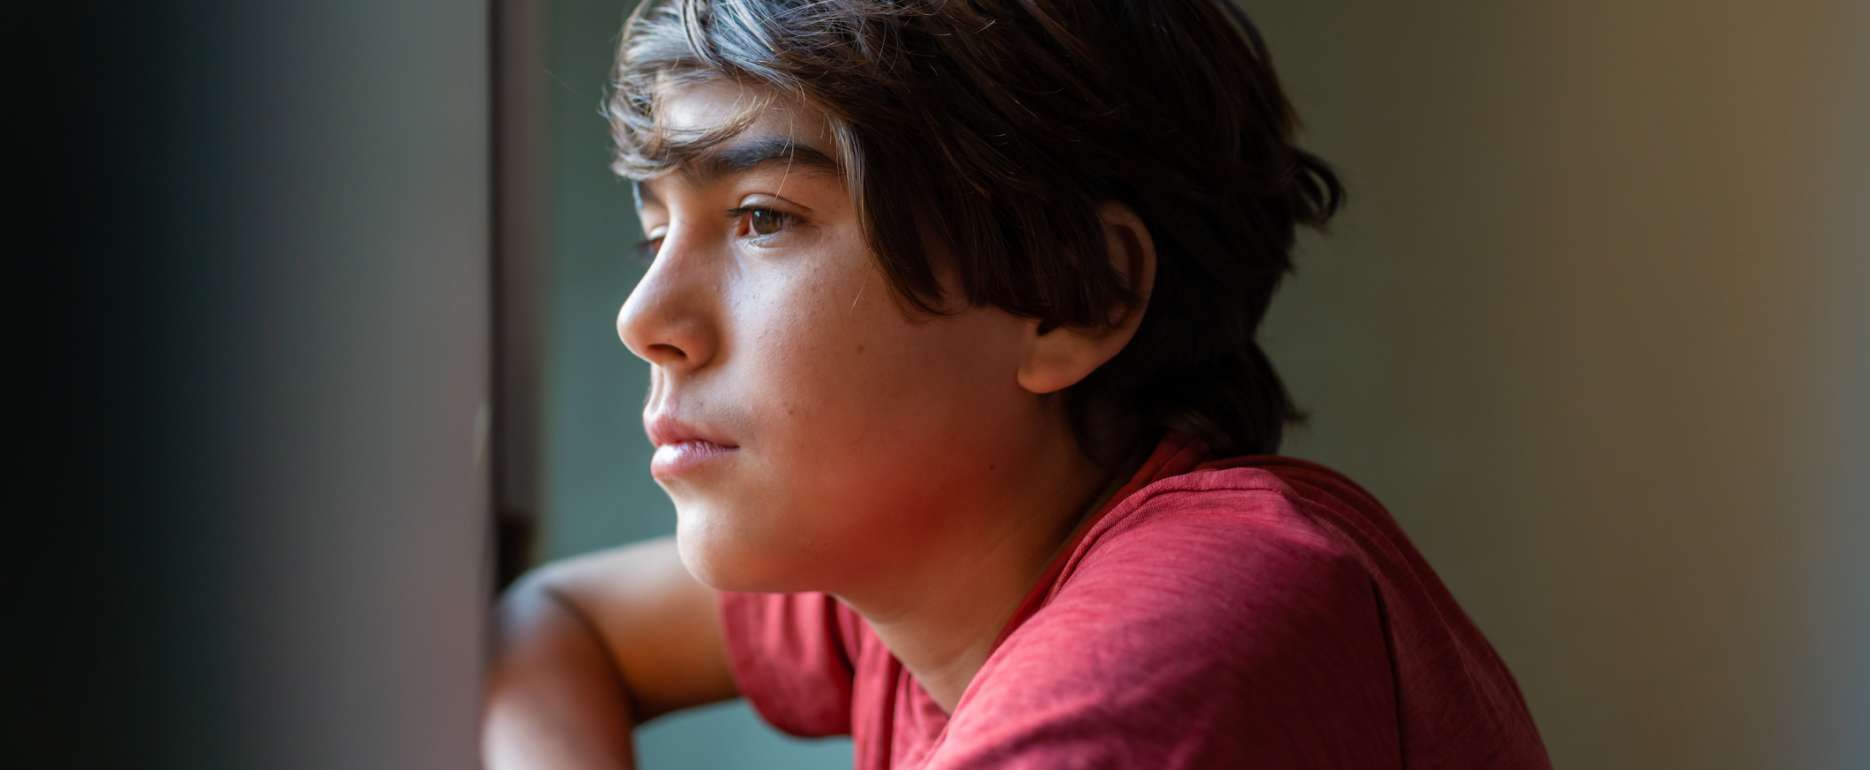 Quaranteenager's Guide to Overcoming Anxiety and Fears - Visions Treatment Center